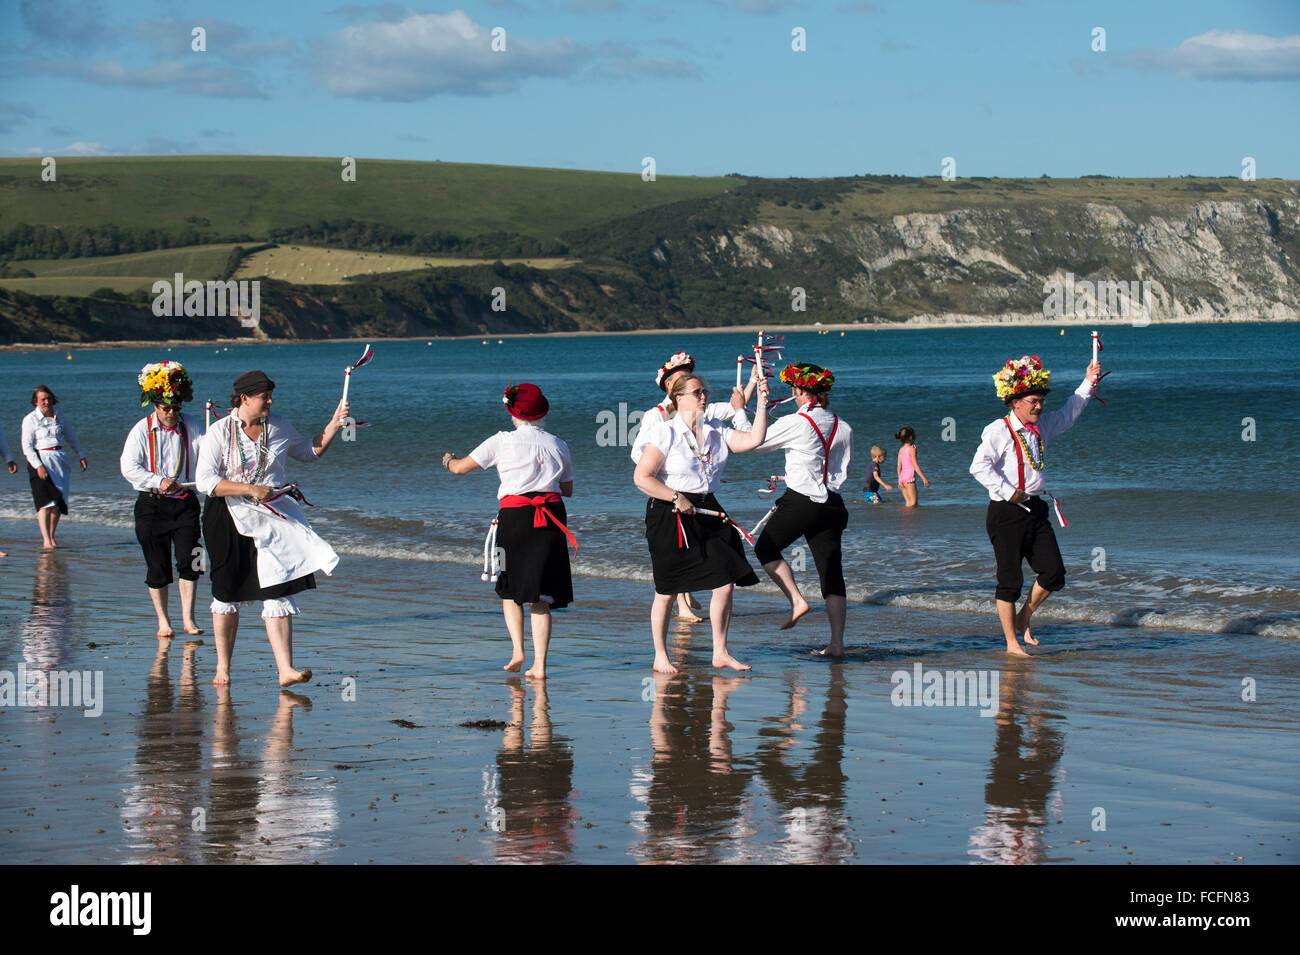 The Swanage Folk festival in Dorset is a weekend of various kinds of morris dancing and folk music. Stock Photo